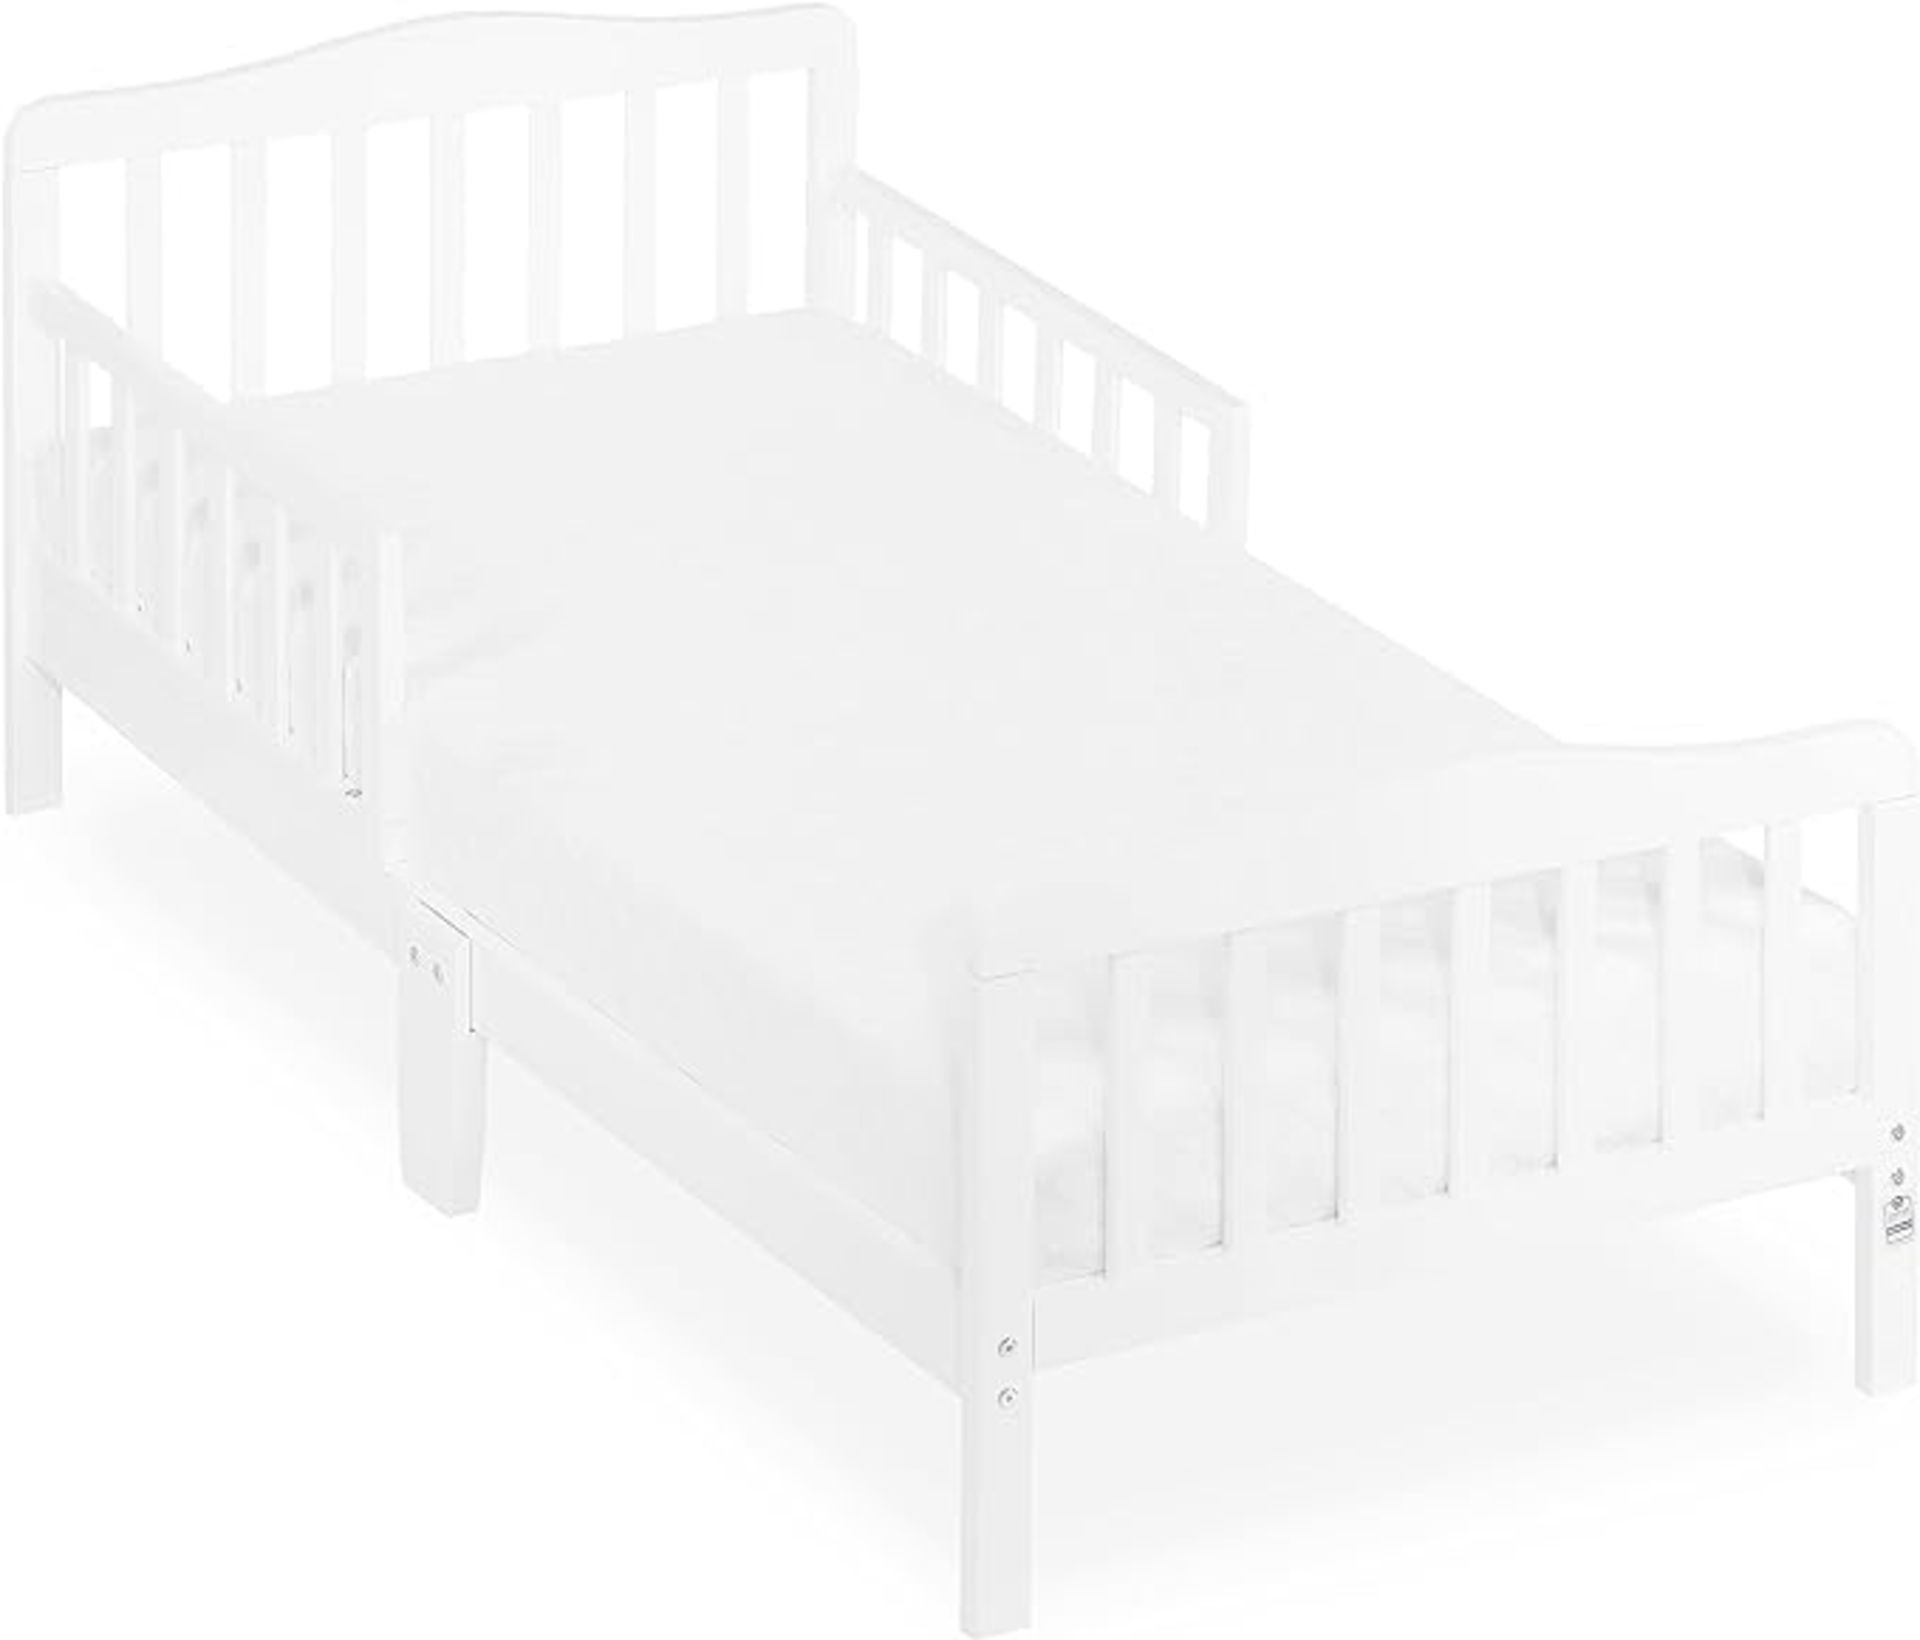 10 X Brand New Dream on Me Classic Toddler BedS. Product dimensionS - 144.8L x 71.1W x 76.2H CM - Image 3 of 4